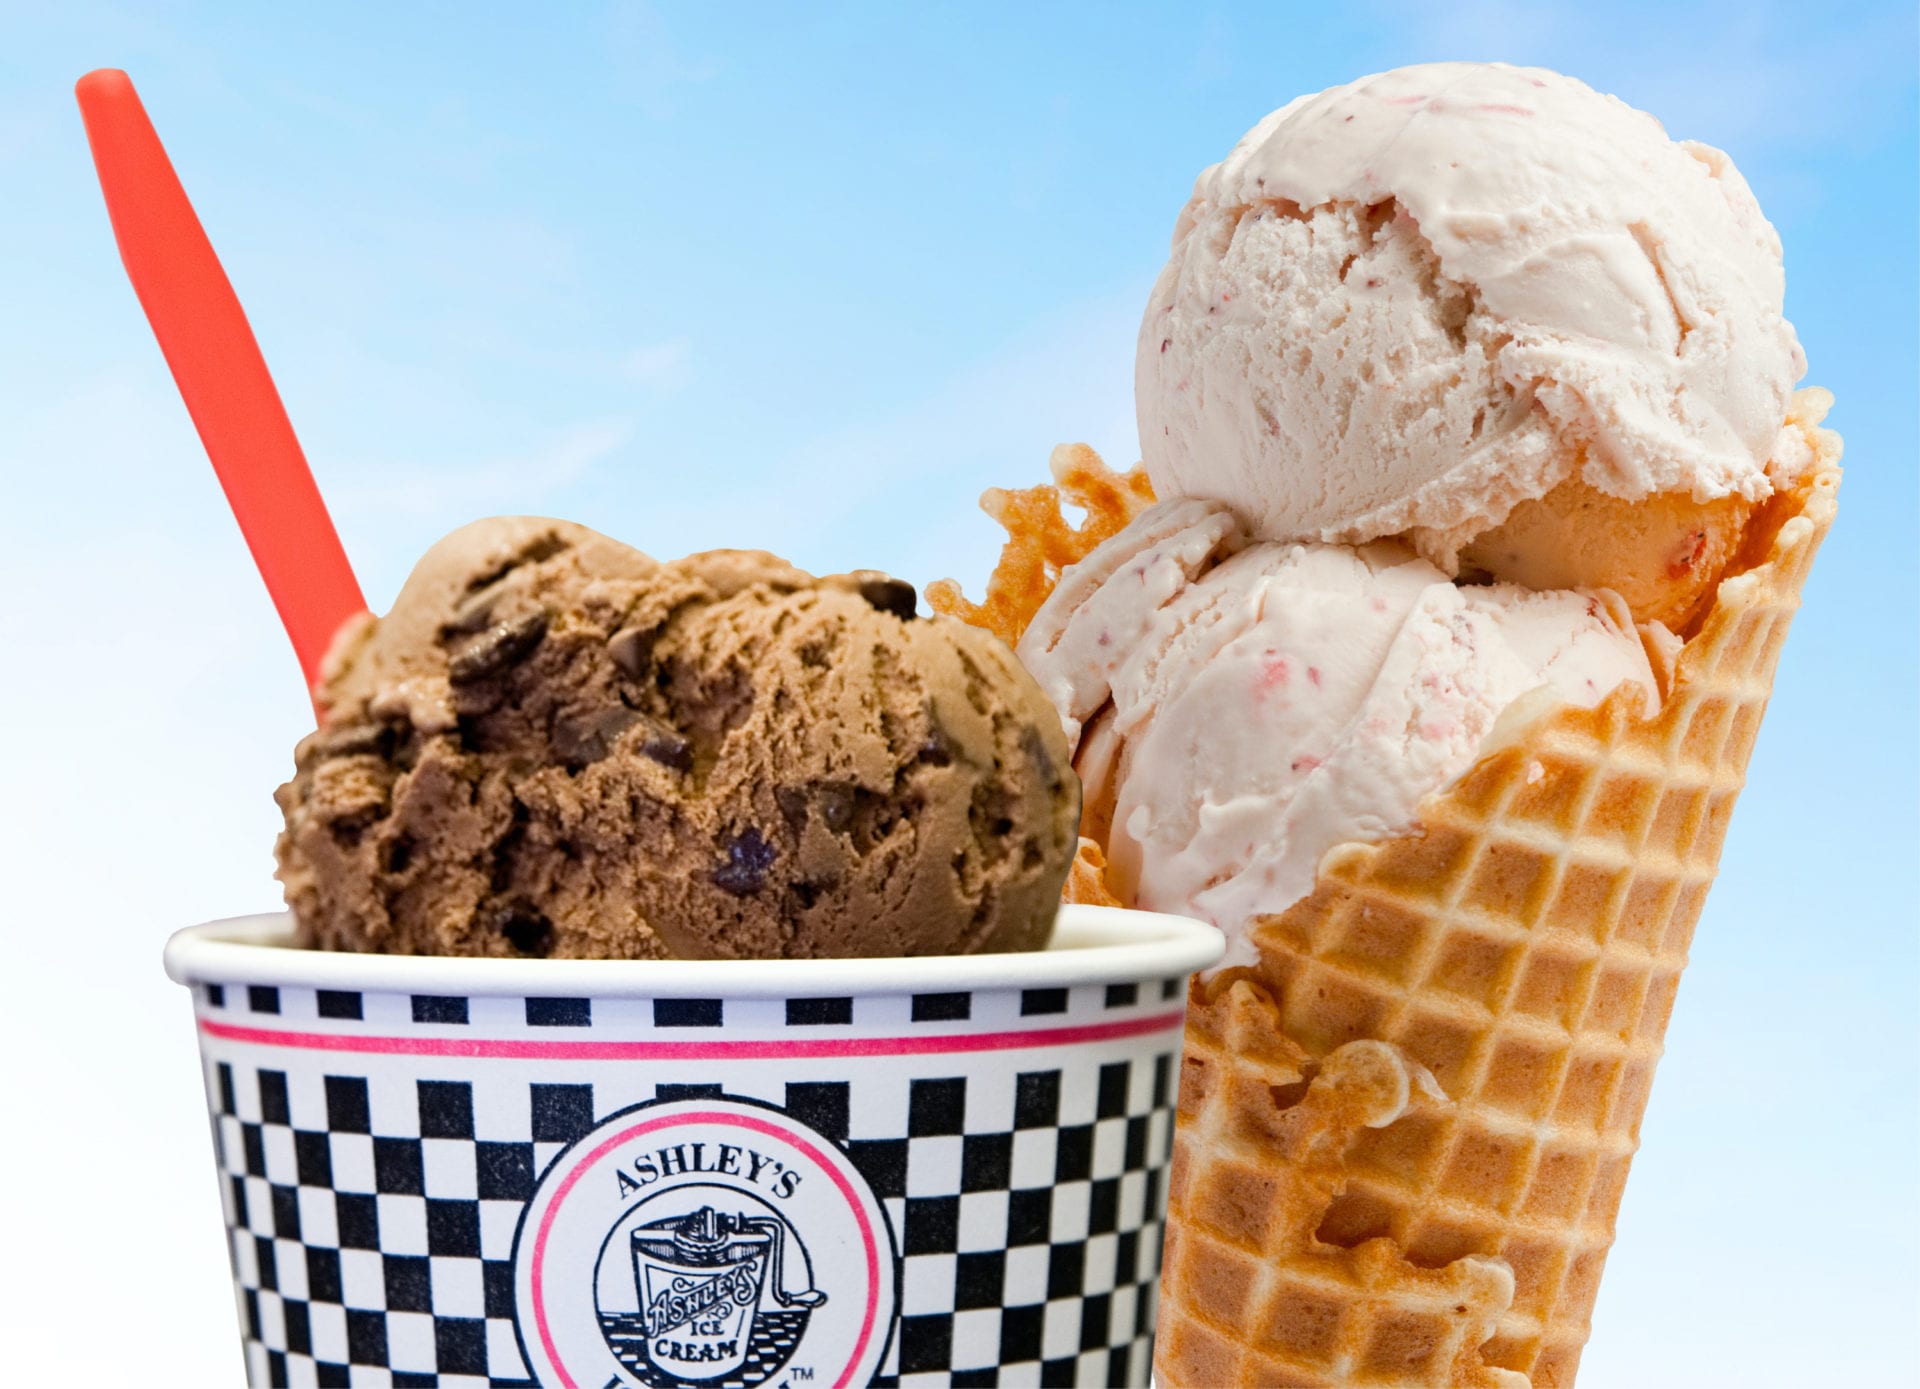 Free Ice Cream with Purchase